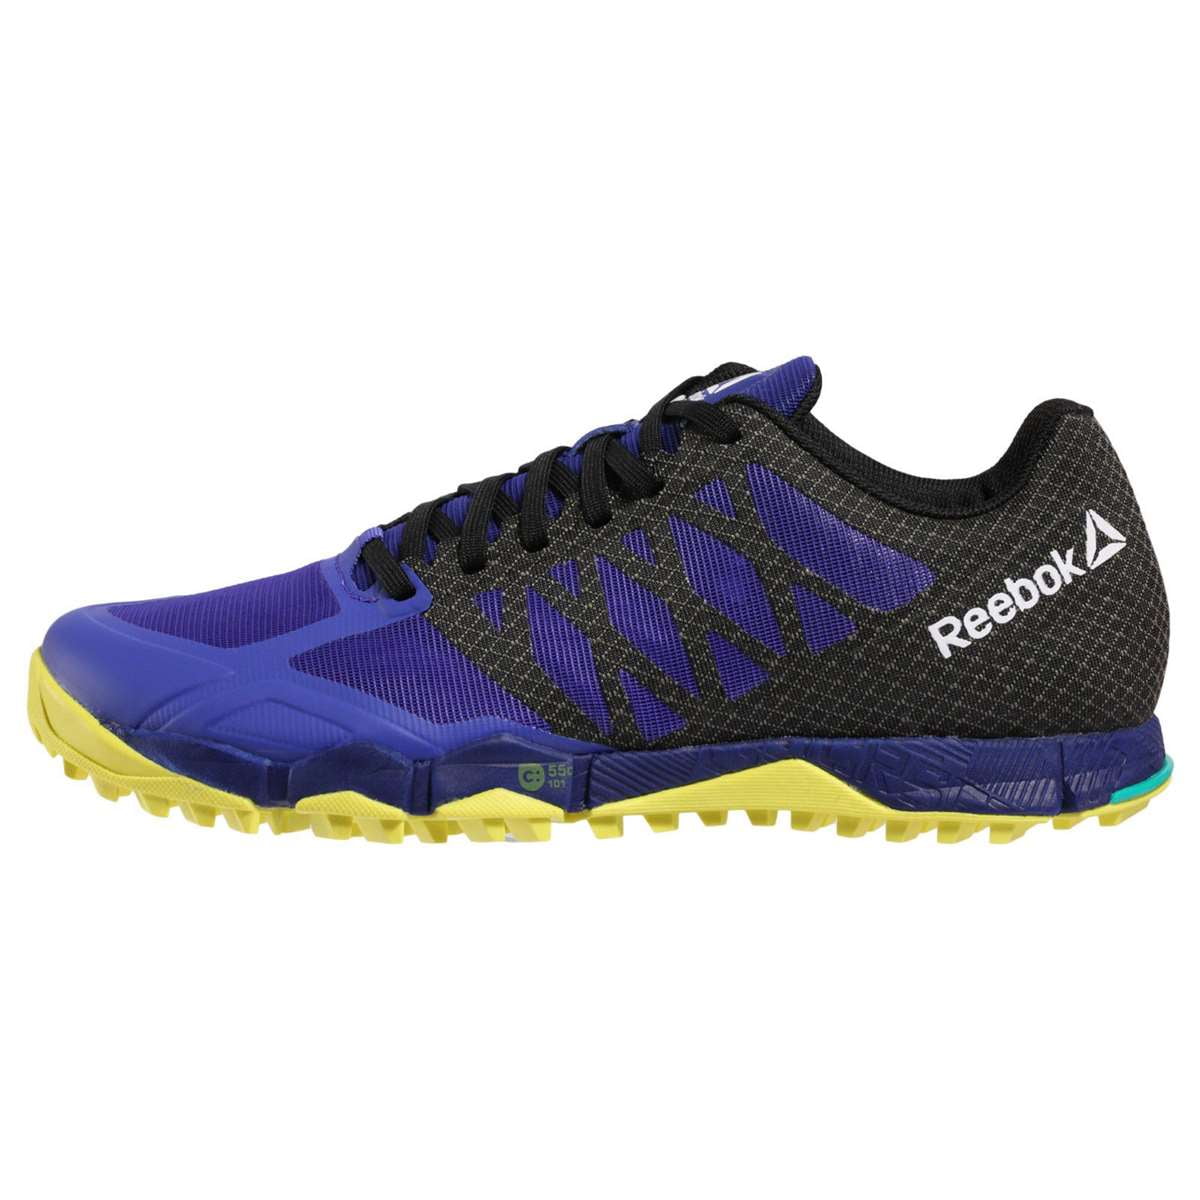 R Crossfit Speed Field Training Shoes 